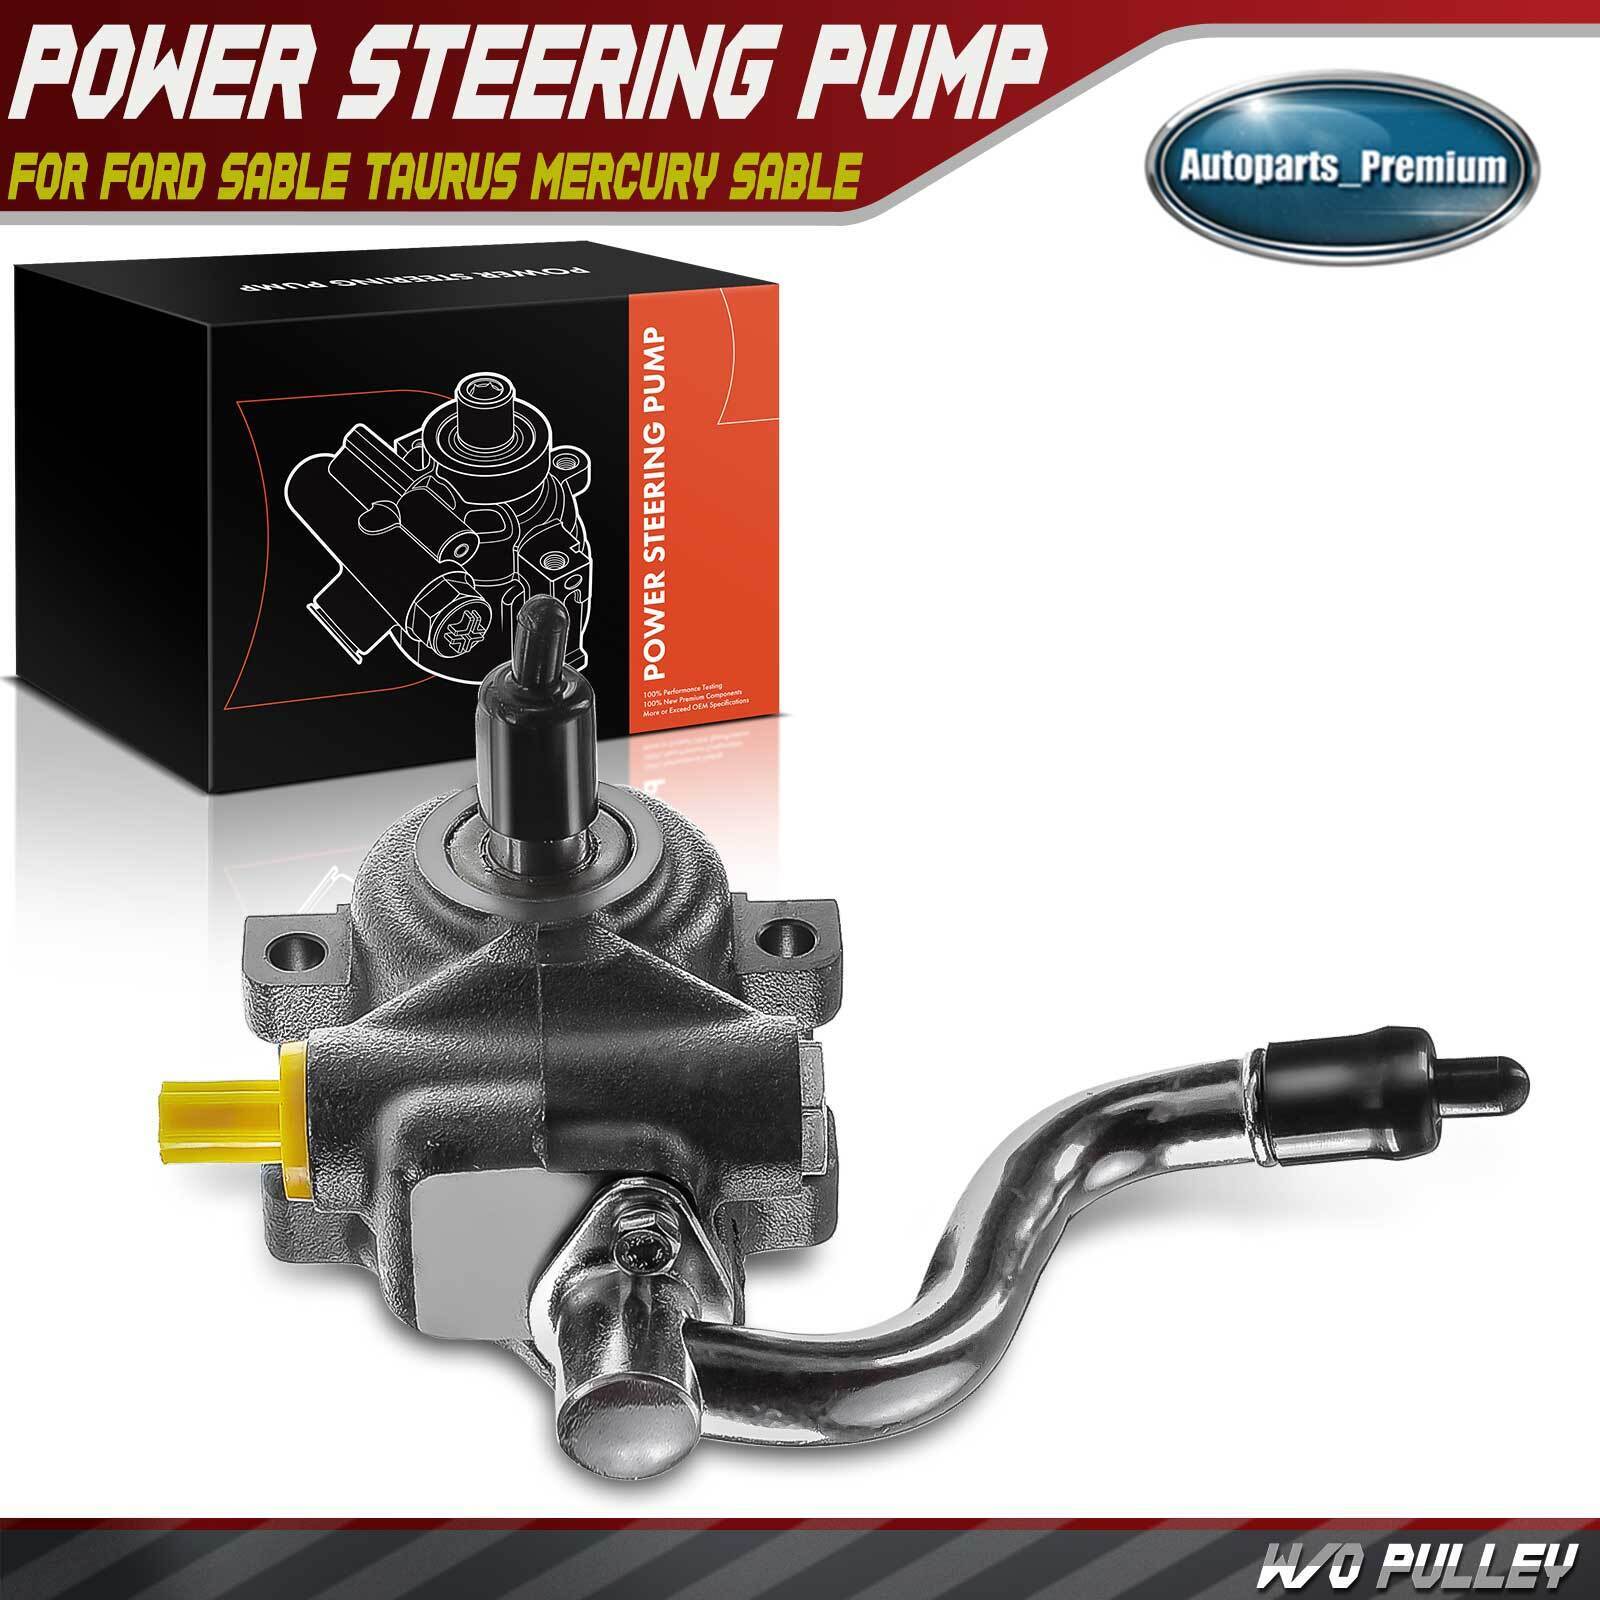 Power Steering Pump for Ford Taurus 96- 05 Mercury Sable 96-05 V6 3.0L DOHC ONLY